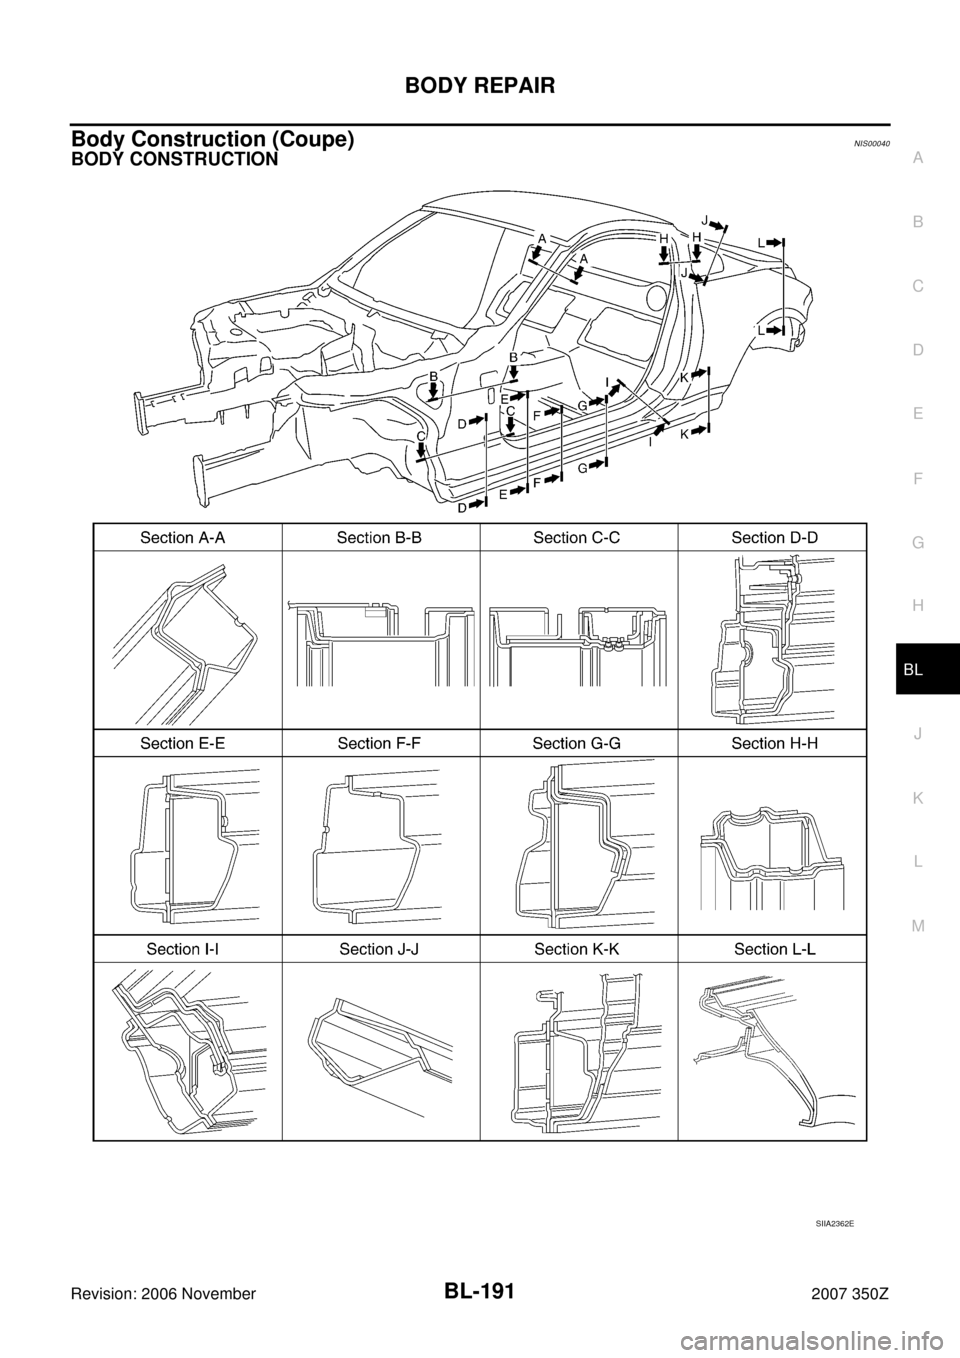 NISSAN 350Z 2007 Z33 Body, Lock And Security System Workshop Manual BODY REPAIR
BL-191
C
D
E
F
G
H
J
K
L
MA
B
BL
Revision: 2006 November2007 350Z
Body Construction (Coupe)NIS00040
BODY CONSTRUCTION
SIIA2362E 